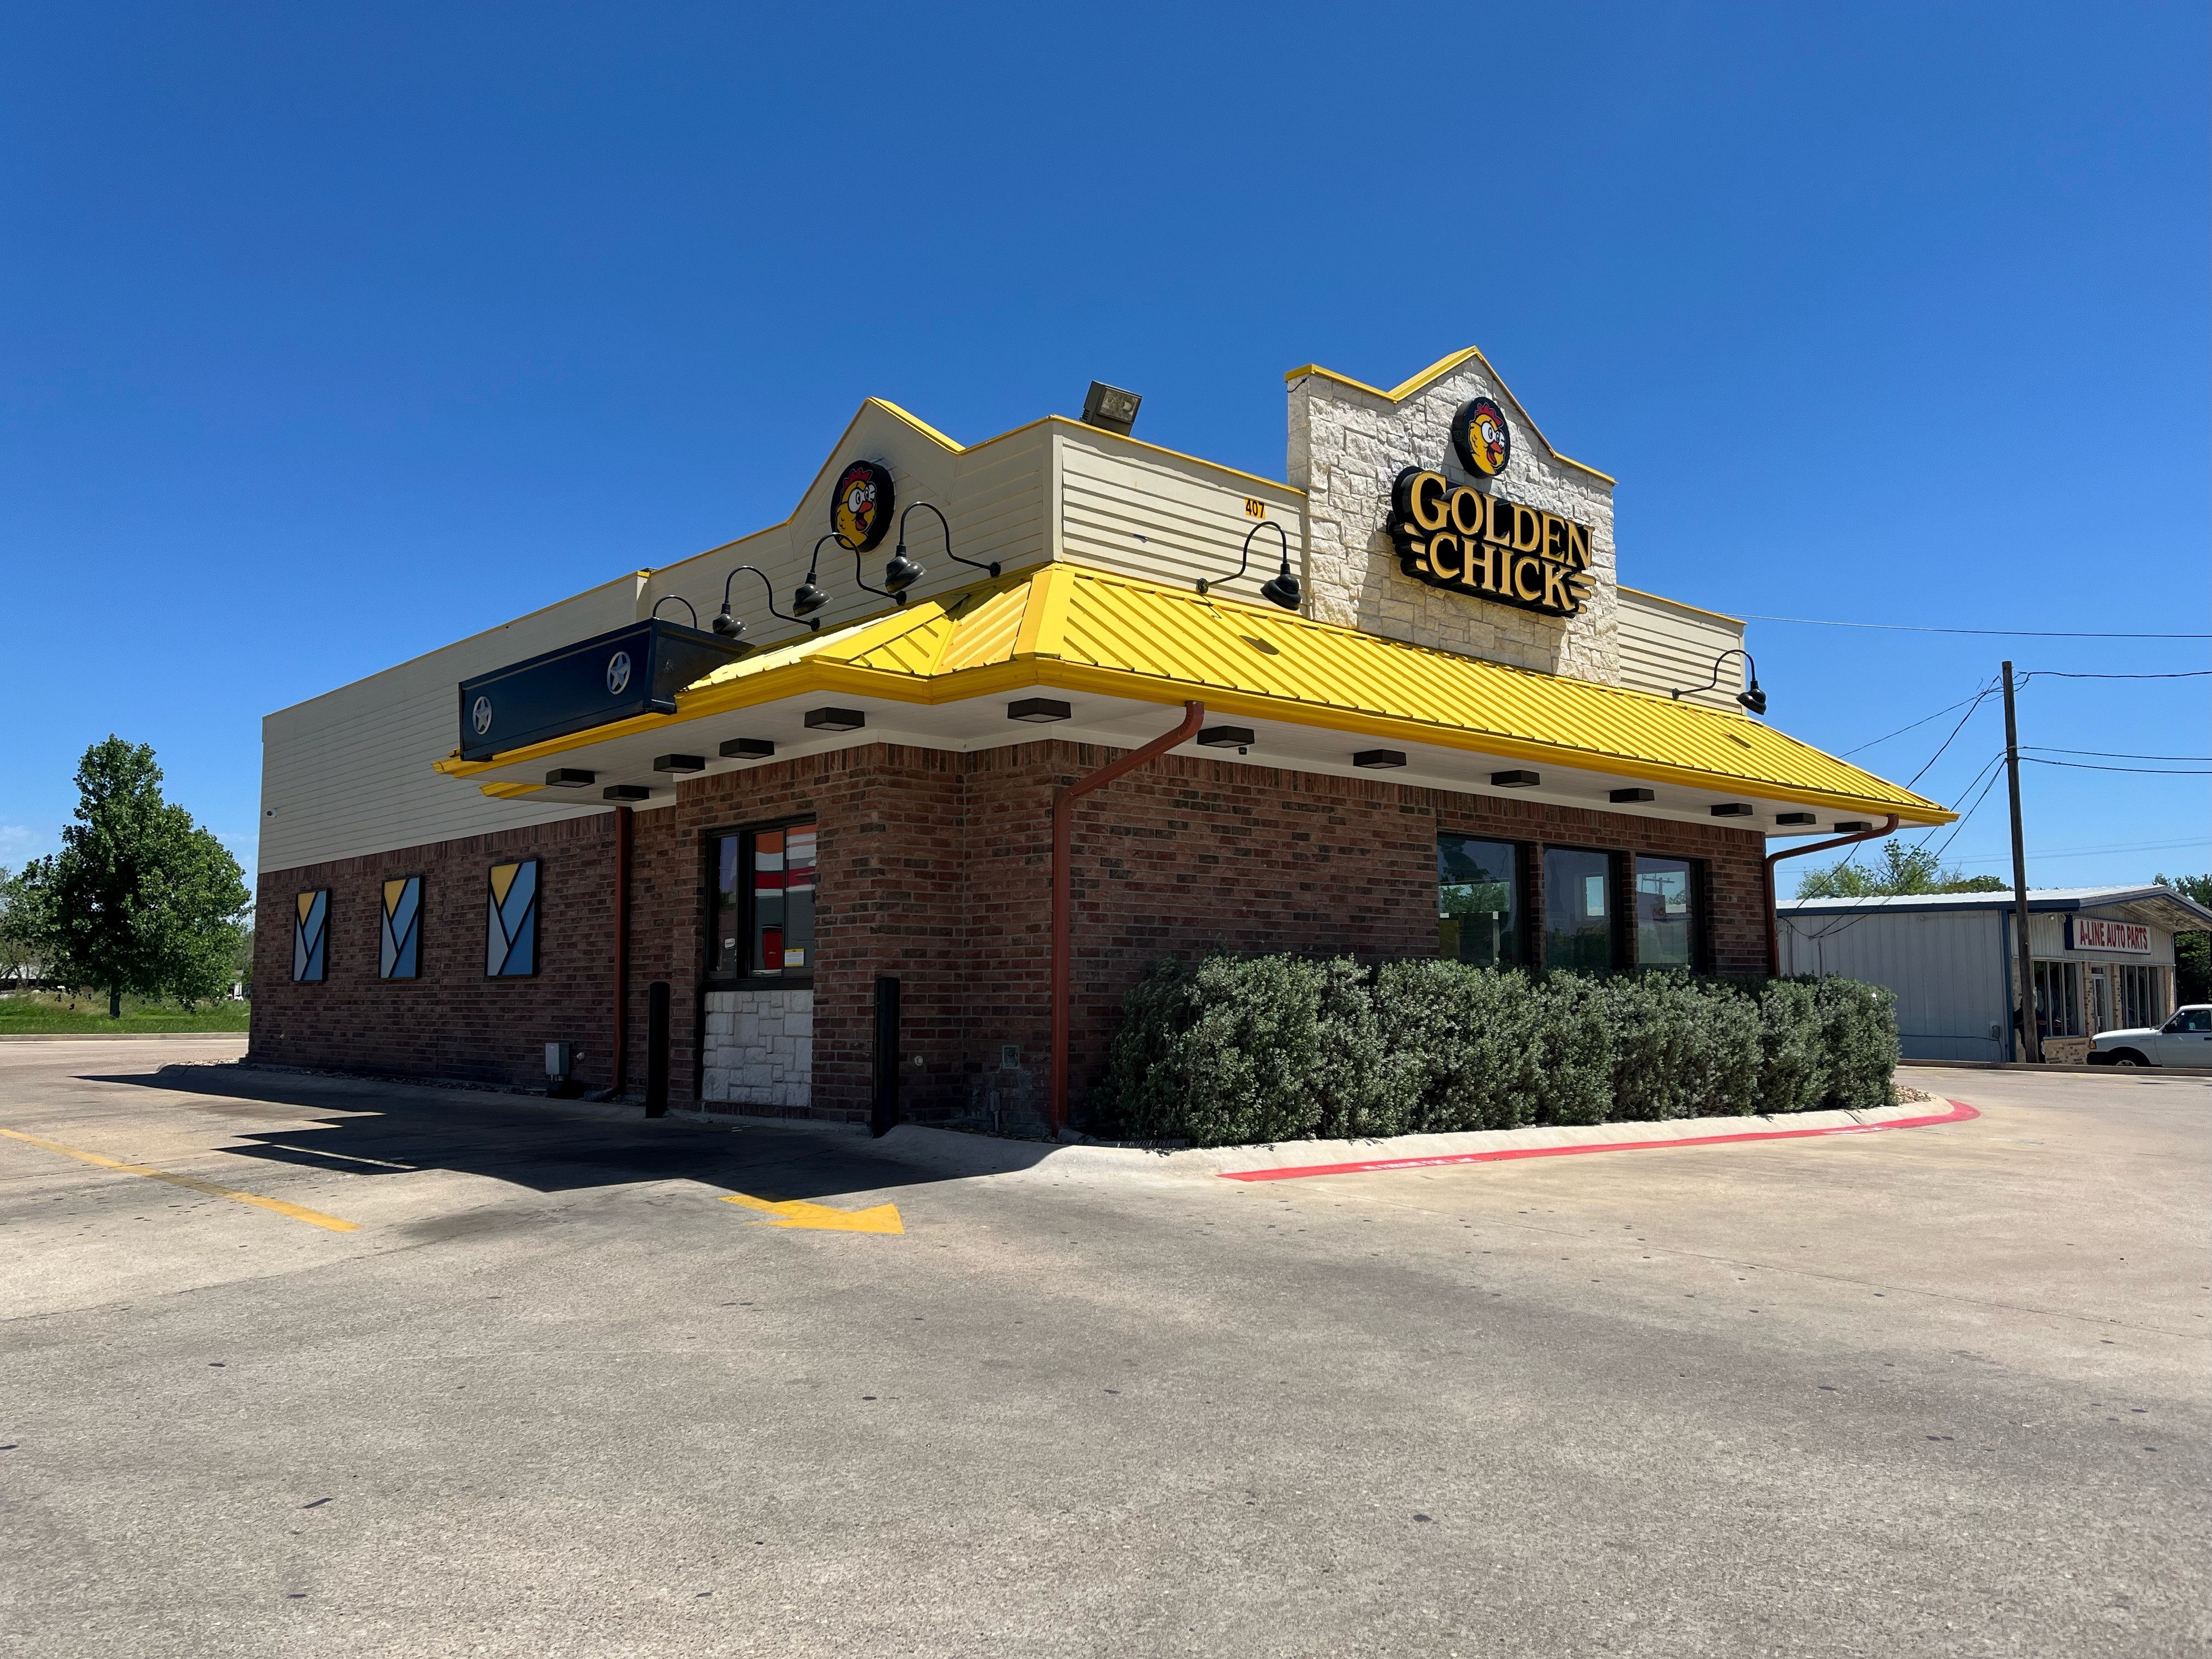 Golden Chick storefront.  Your local Golden Chick fast food restaurant in Elgin, Texas